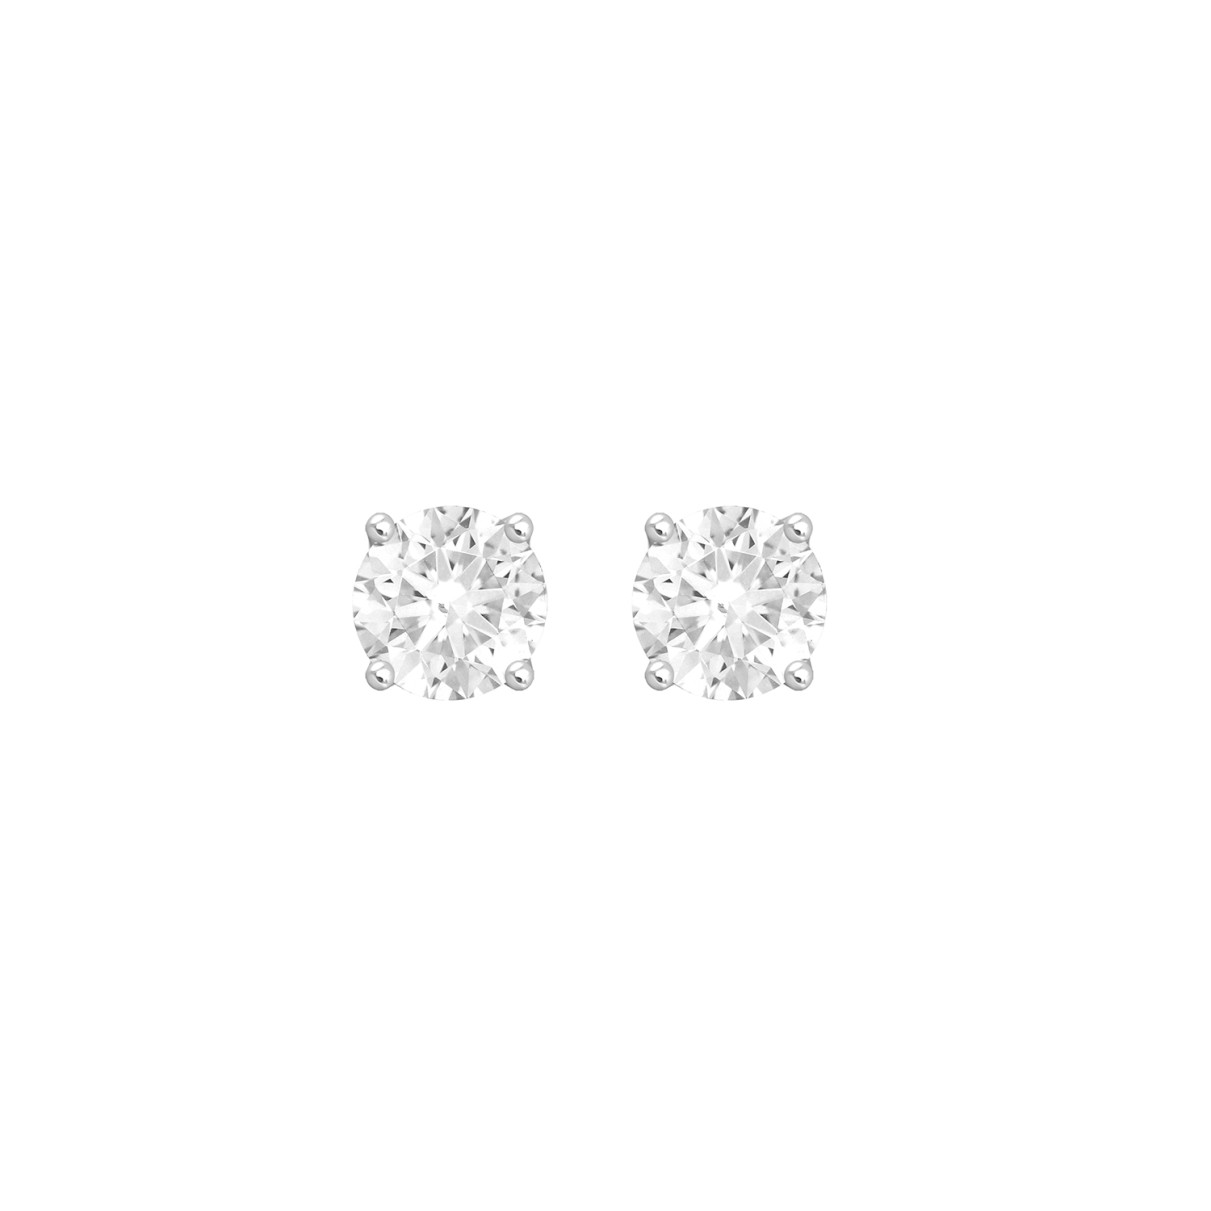 LADIES SOLITAIRE EARRINGS 2CT ROUND DIAMOND 14K WHITE GOLD